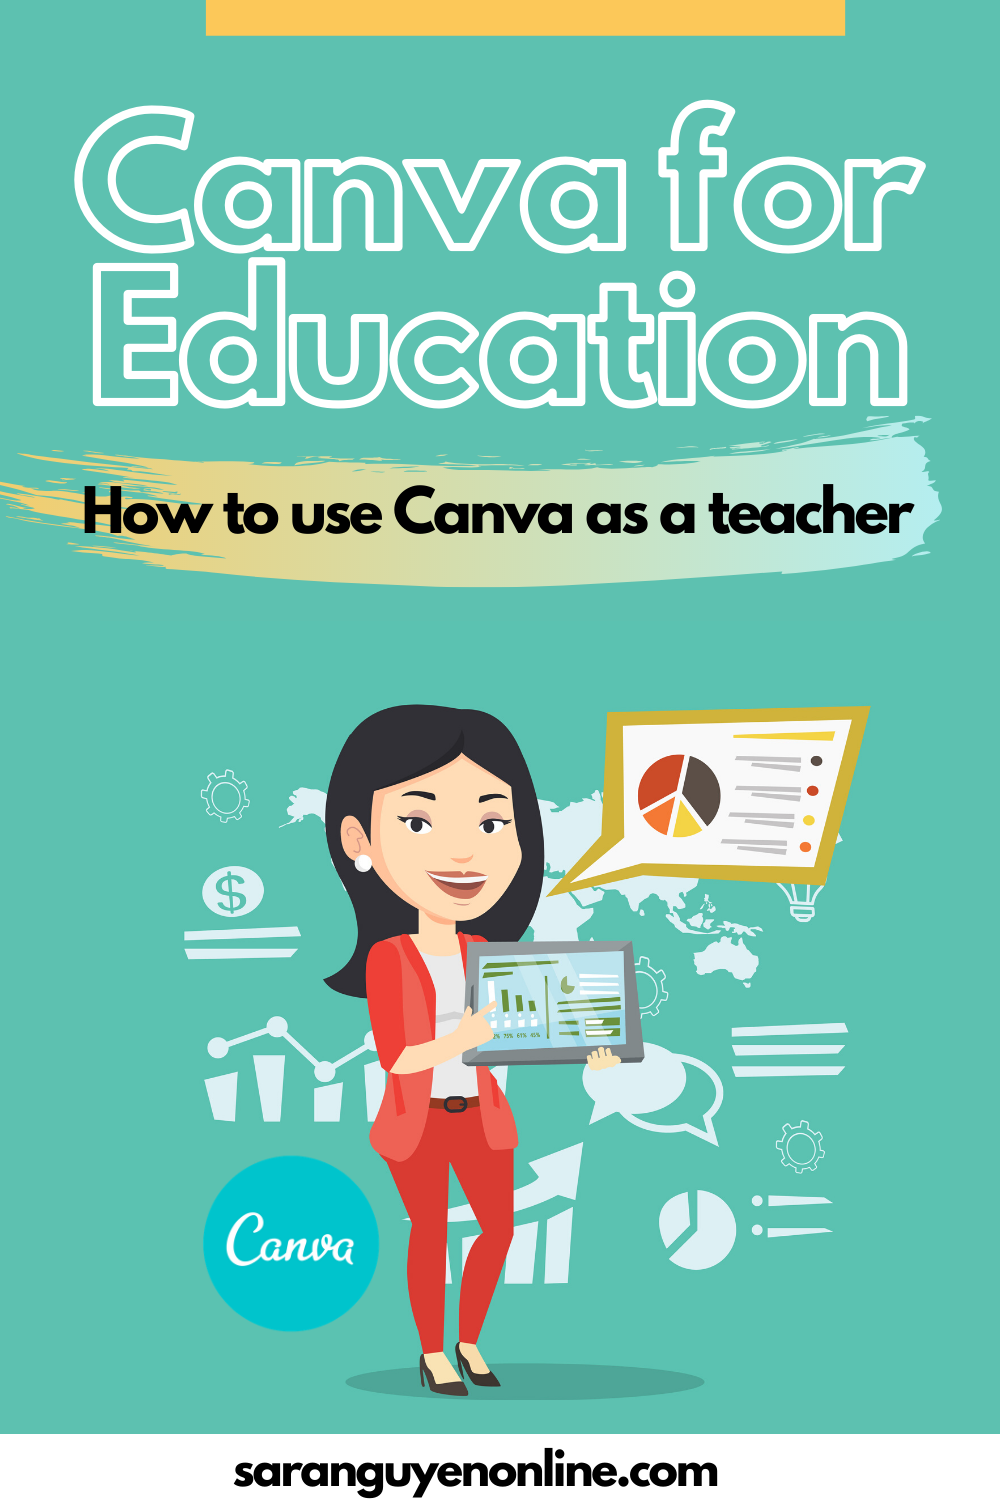 Apply Canva for Education